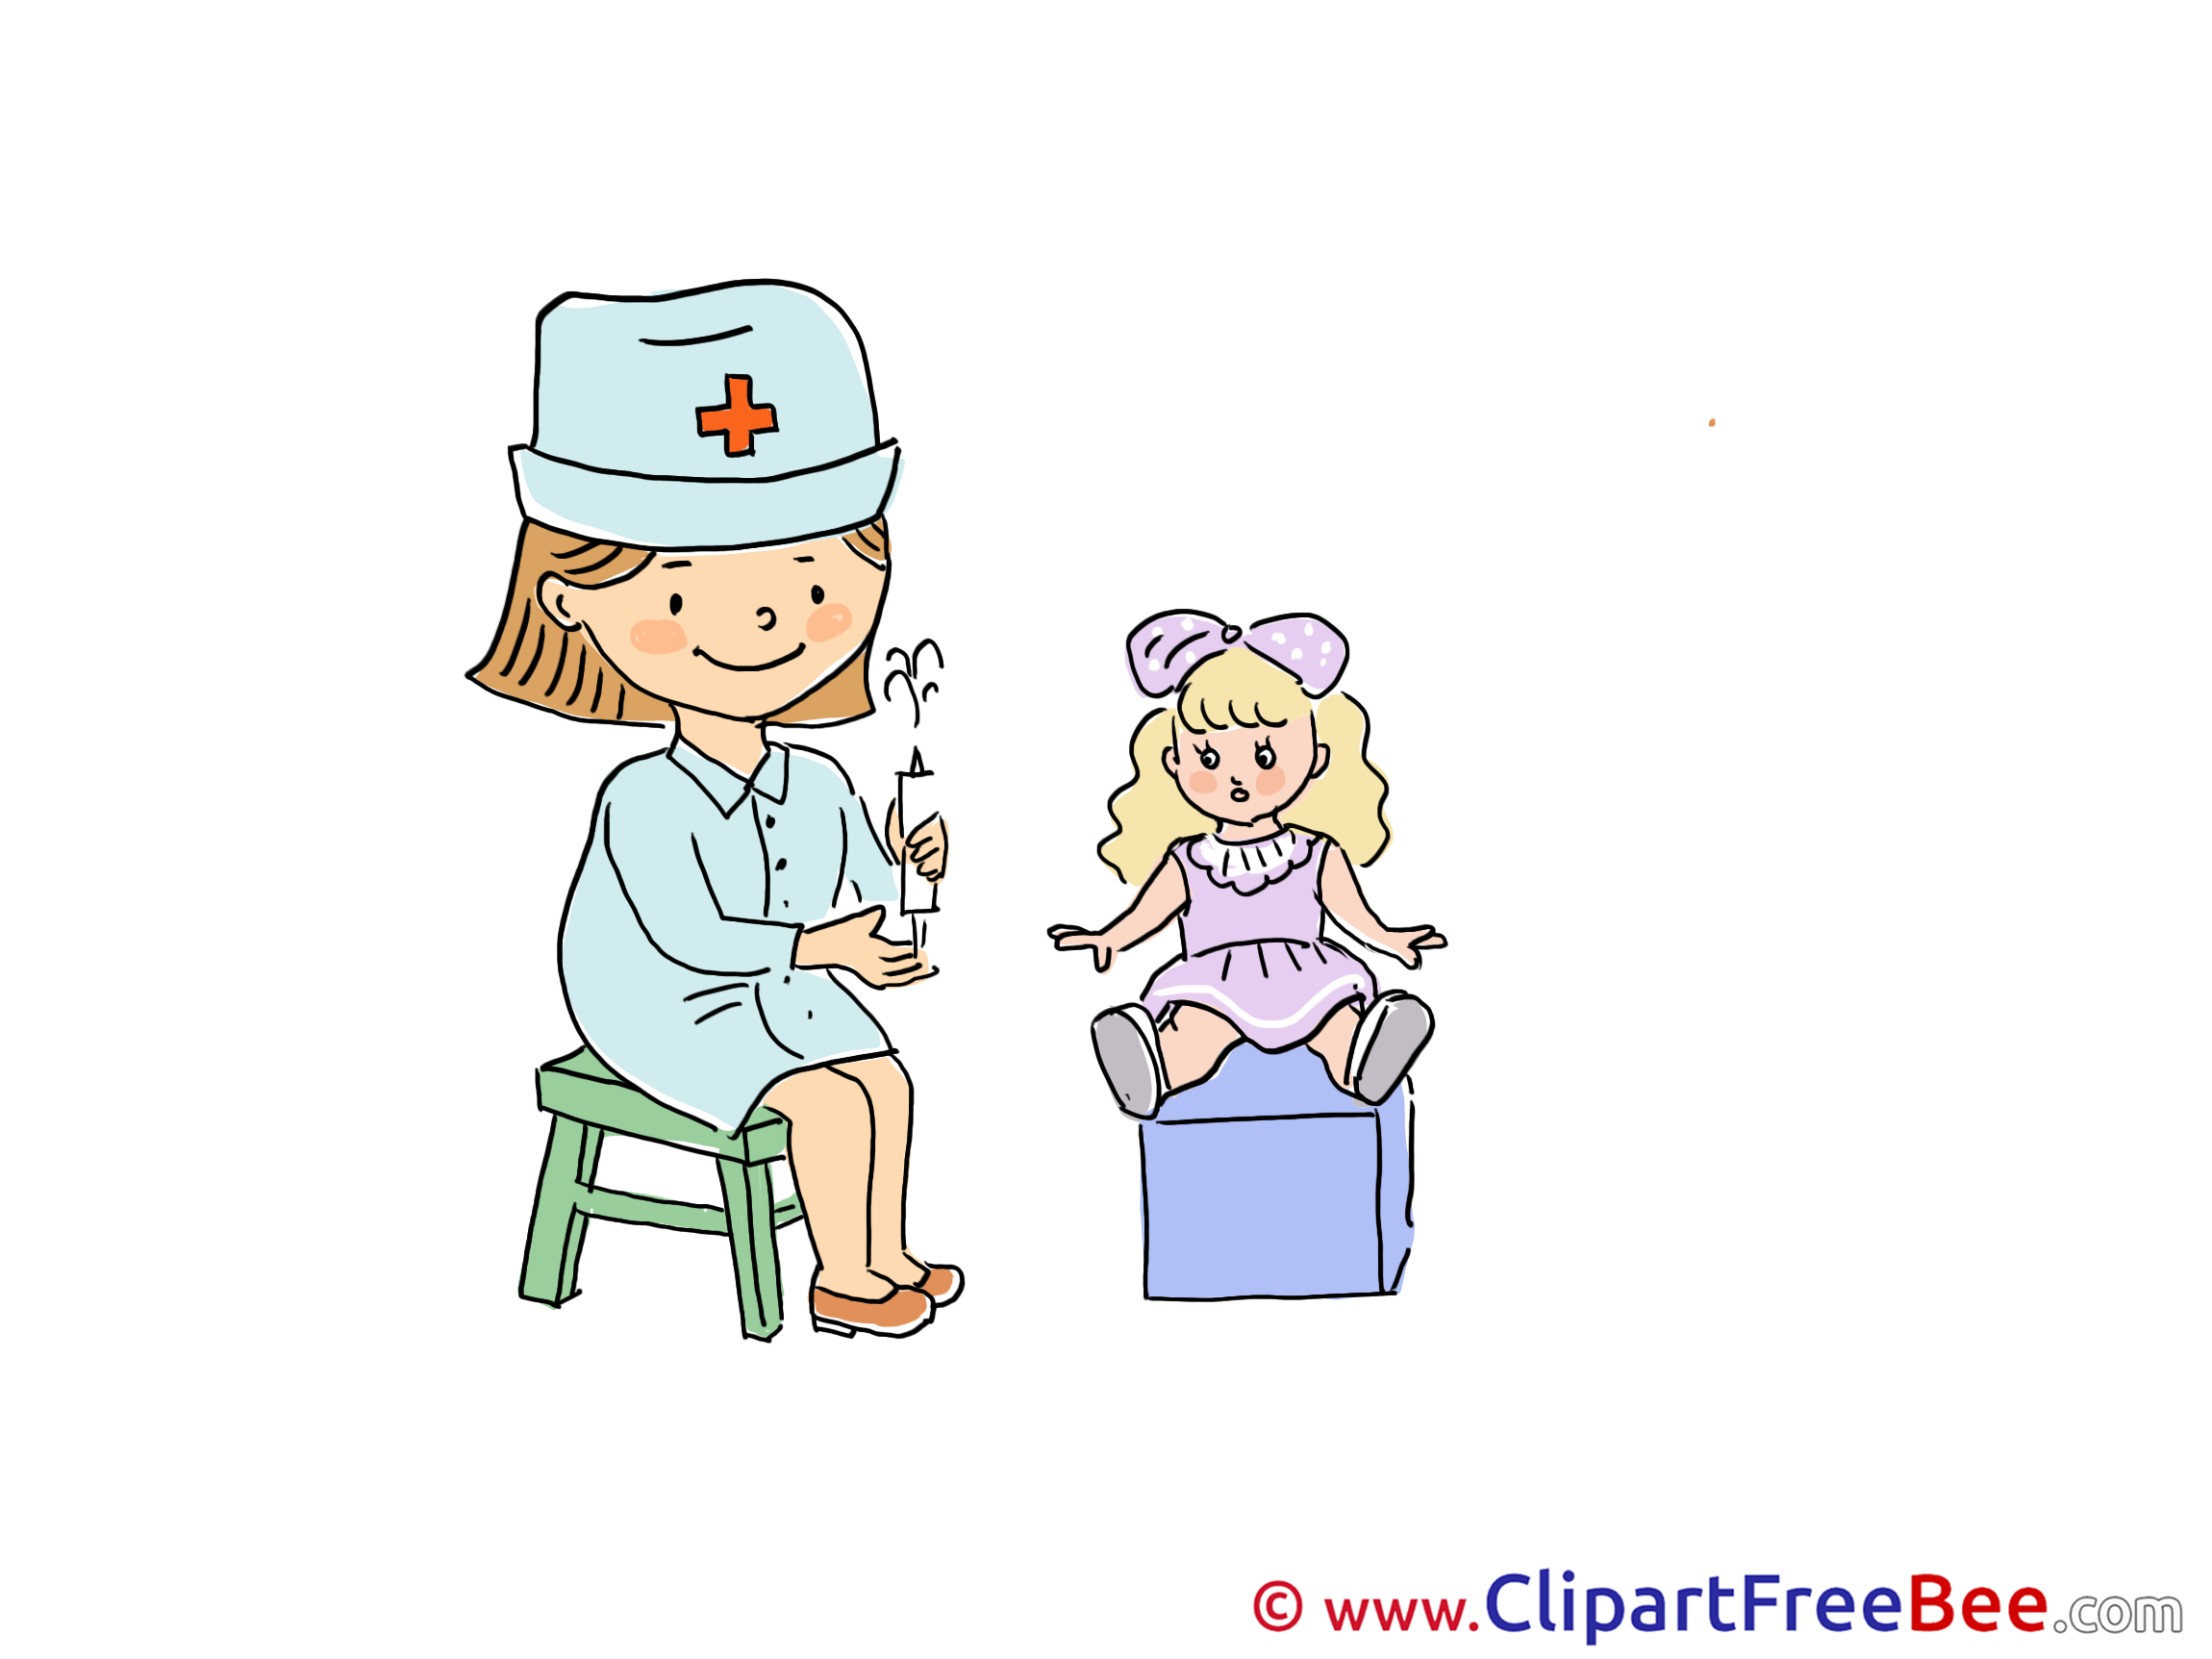 Doll Doctor Clipart free Image download